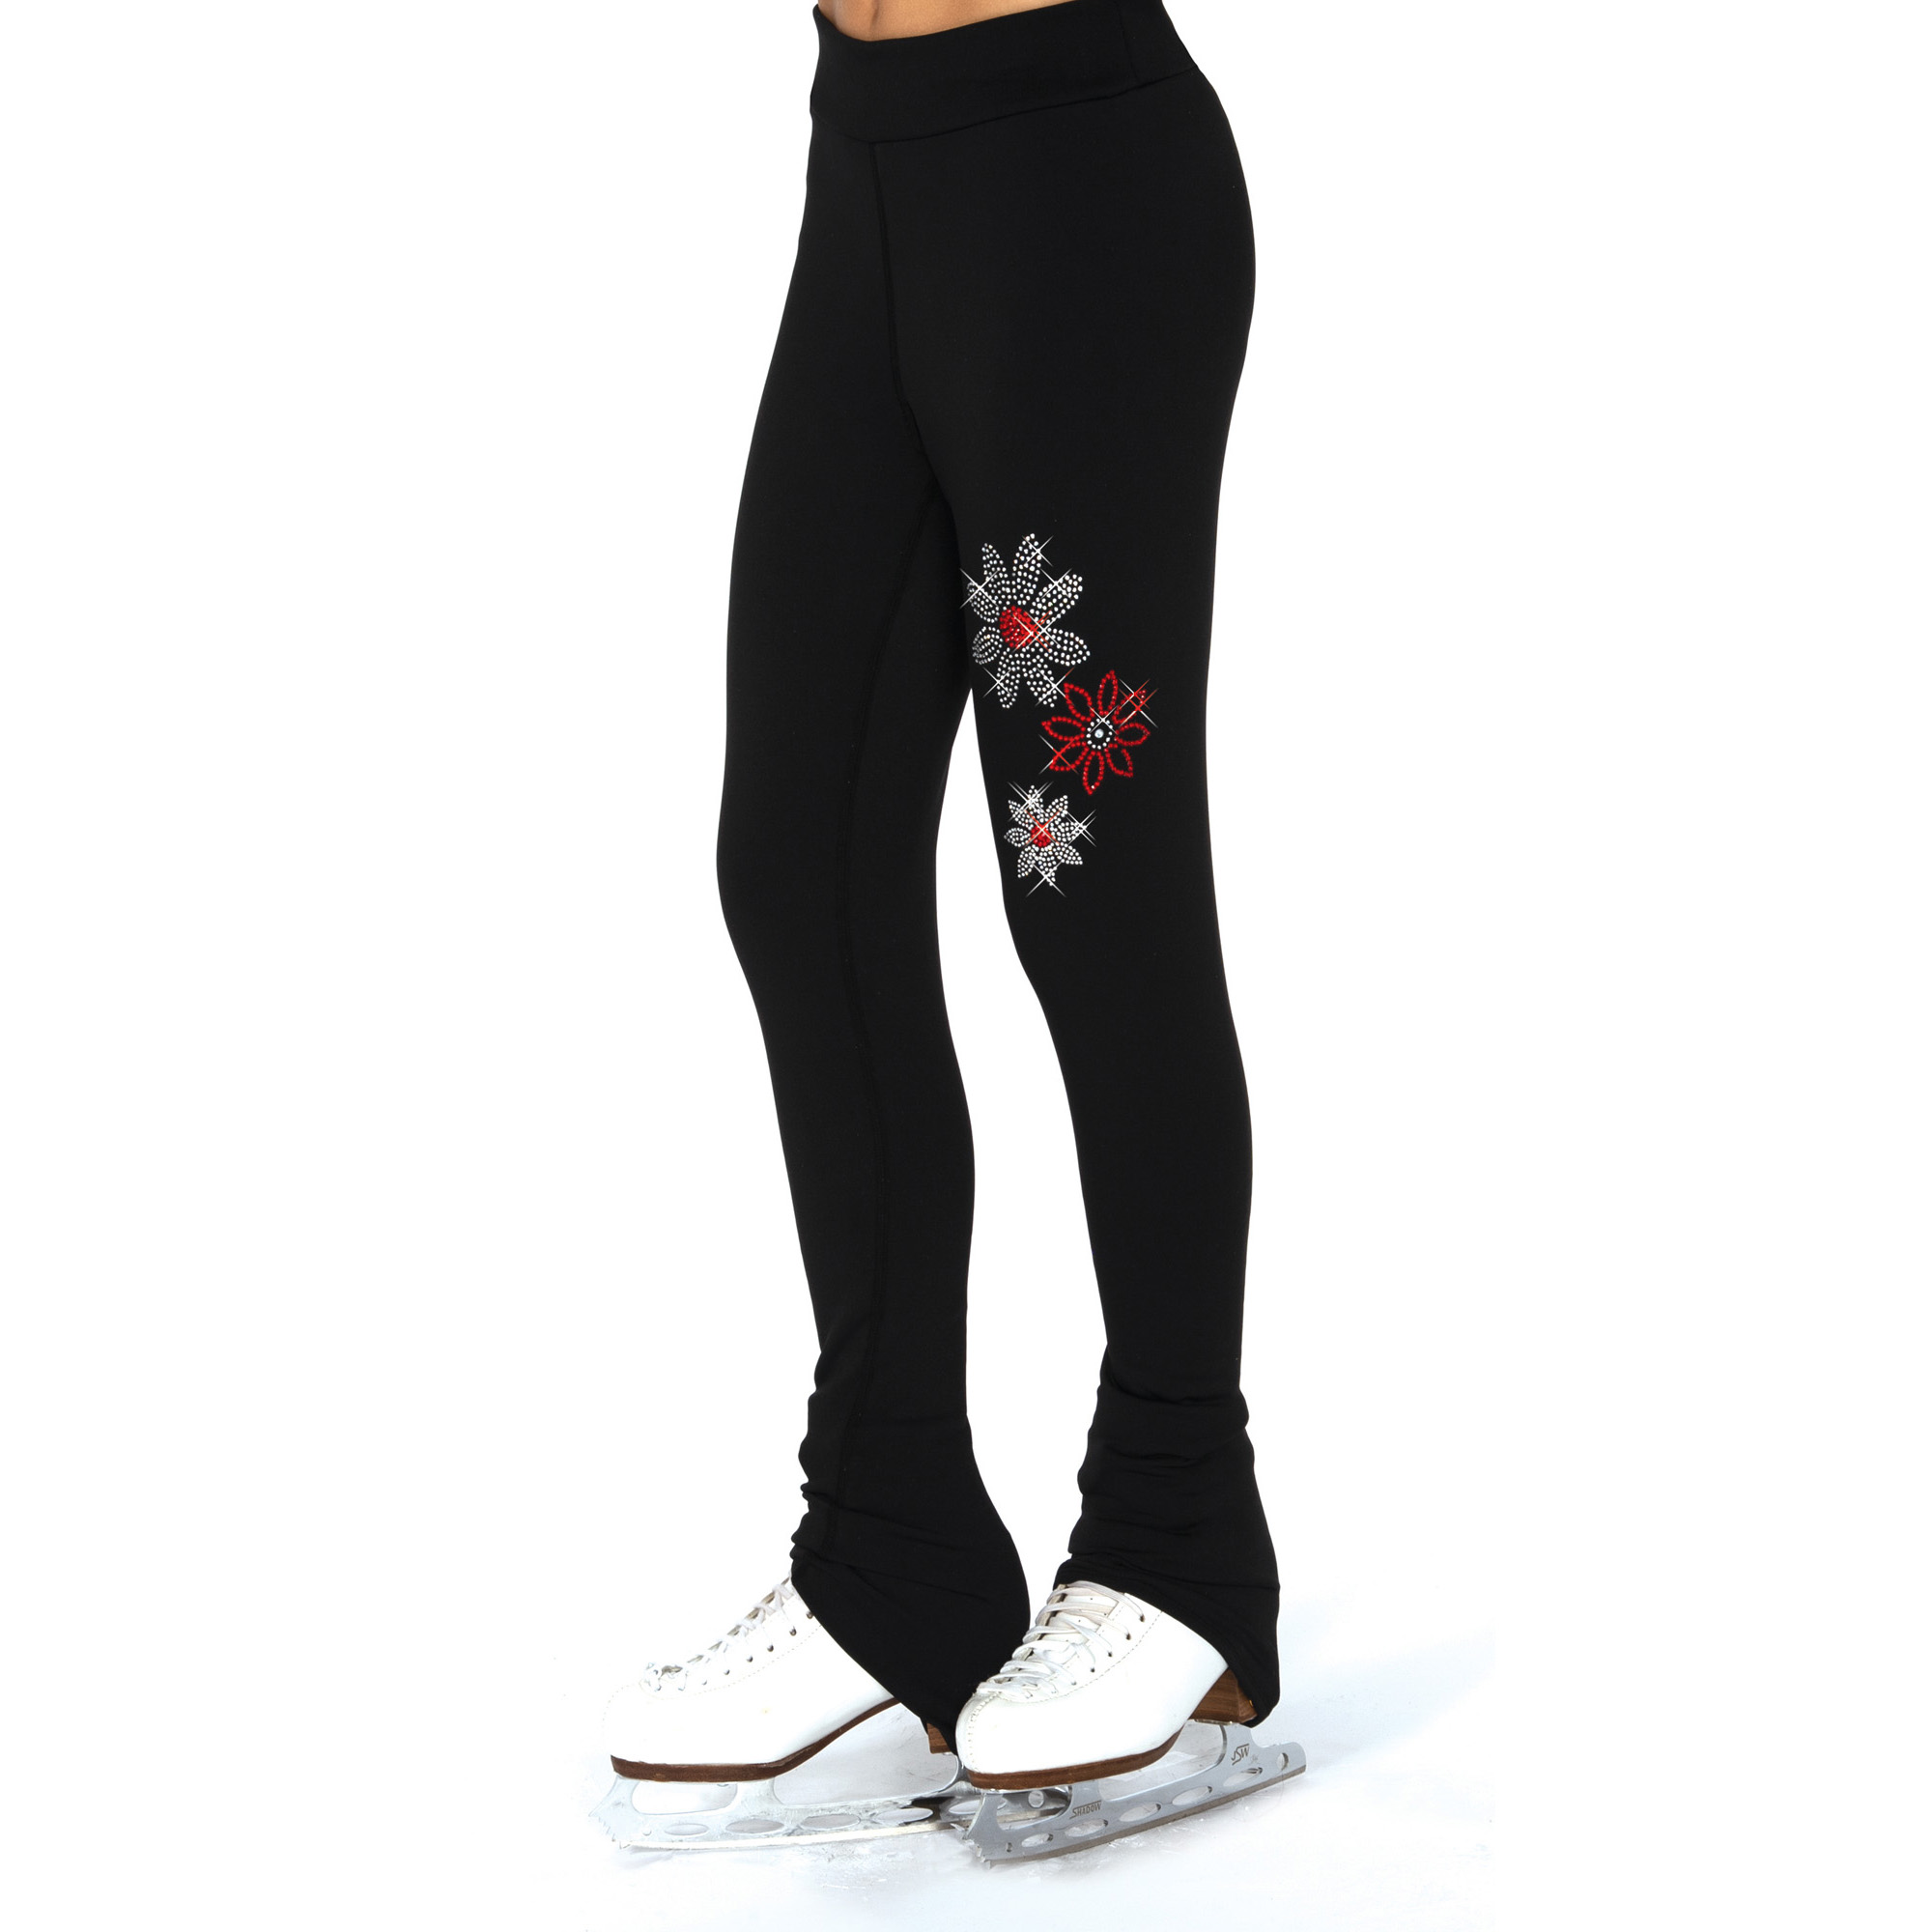 Jerry's S143 SnowScape Inset Figure Skating Leggings